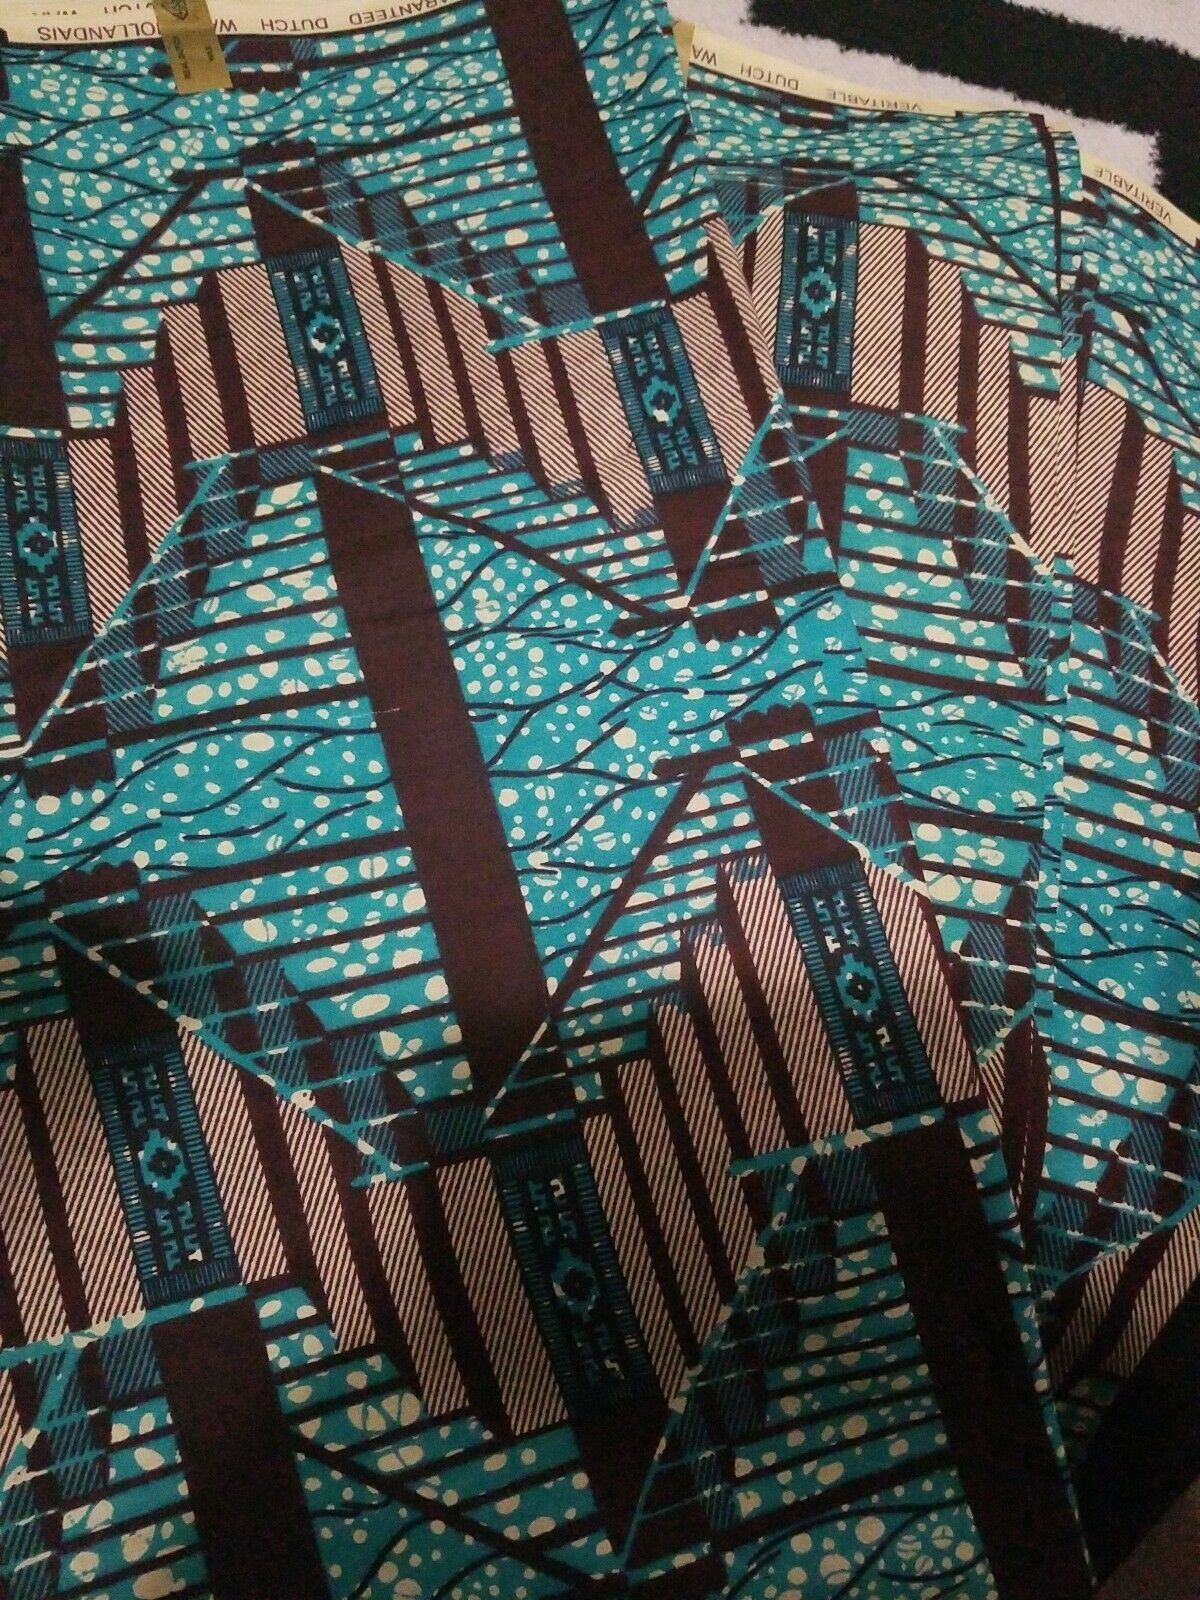 GREEN & BROWN MULTICOLOR African.Wax Print 100% Cotton Fabric 2yatds~$12